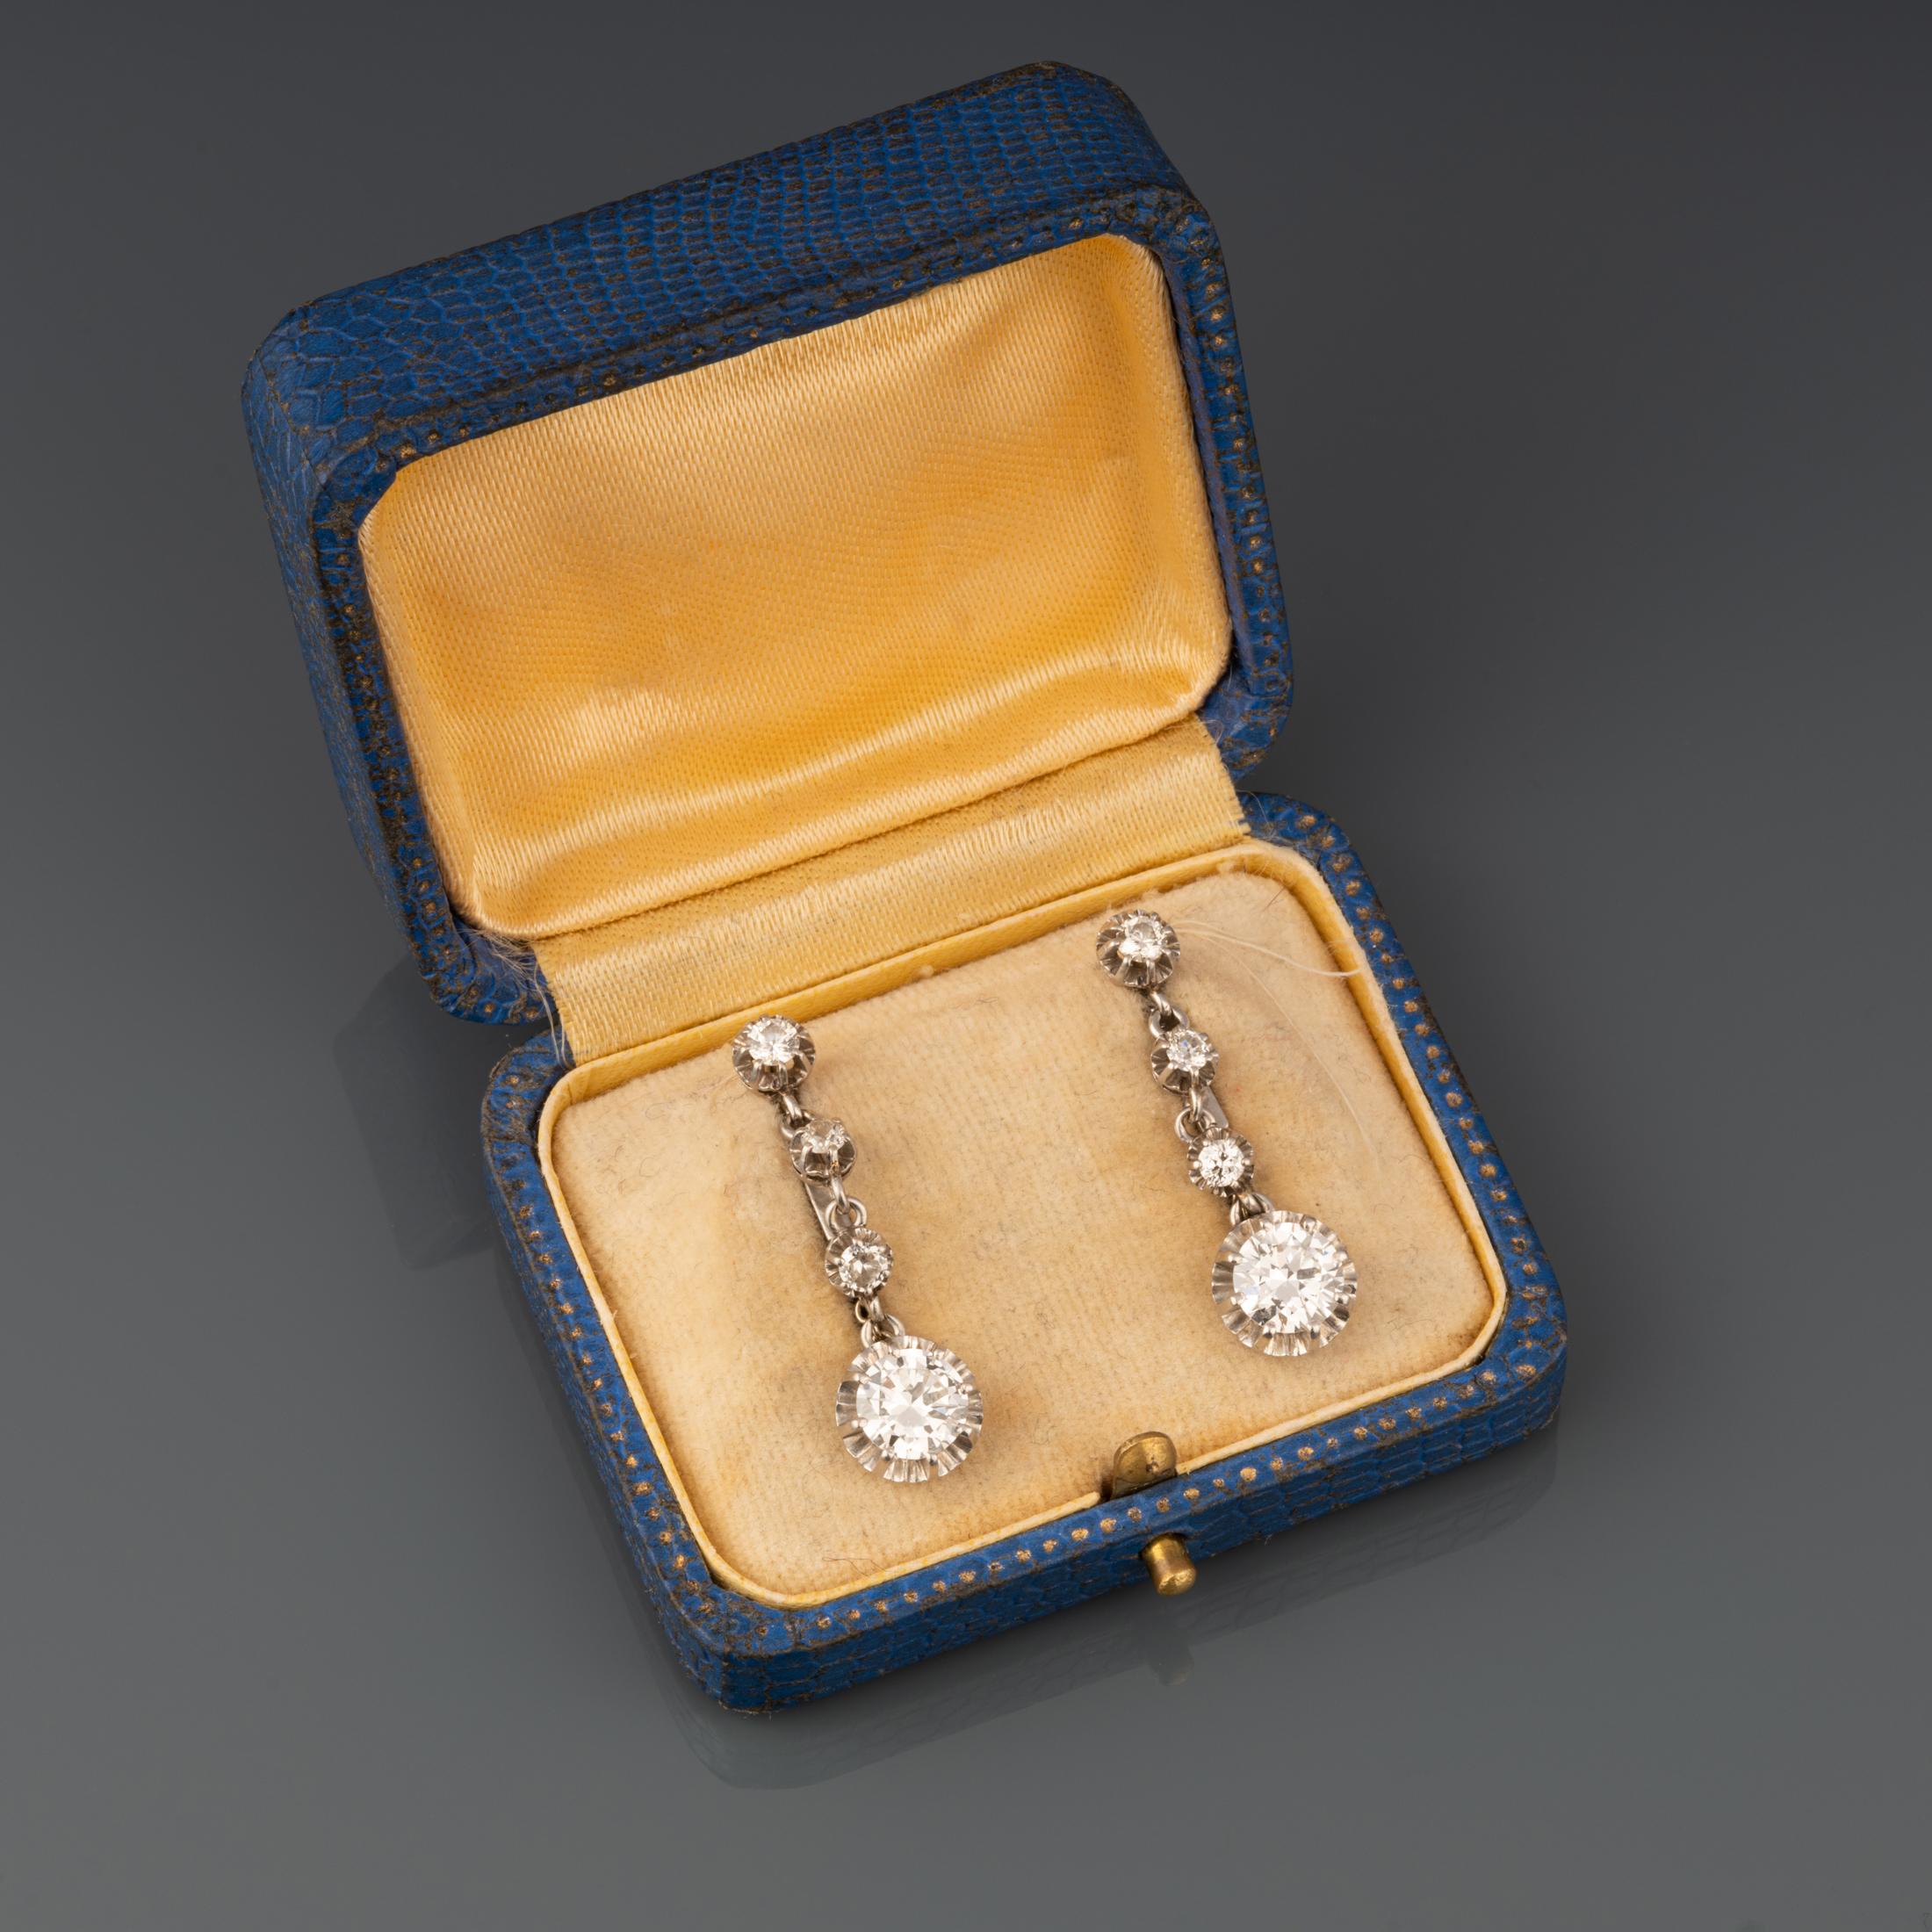 A very beautiful pair of French Art Deco earrings, made in France circa 1920.

Made in white gold and platinum. Multiple hallmarks: eagle head and dog head.

The two principal diamond are round transitional cut, 1.20 carats each approximately, H